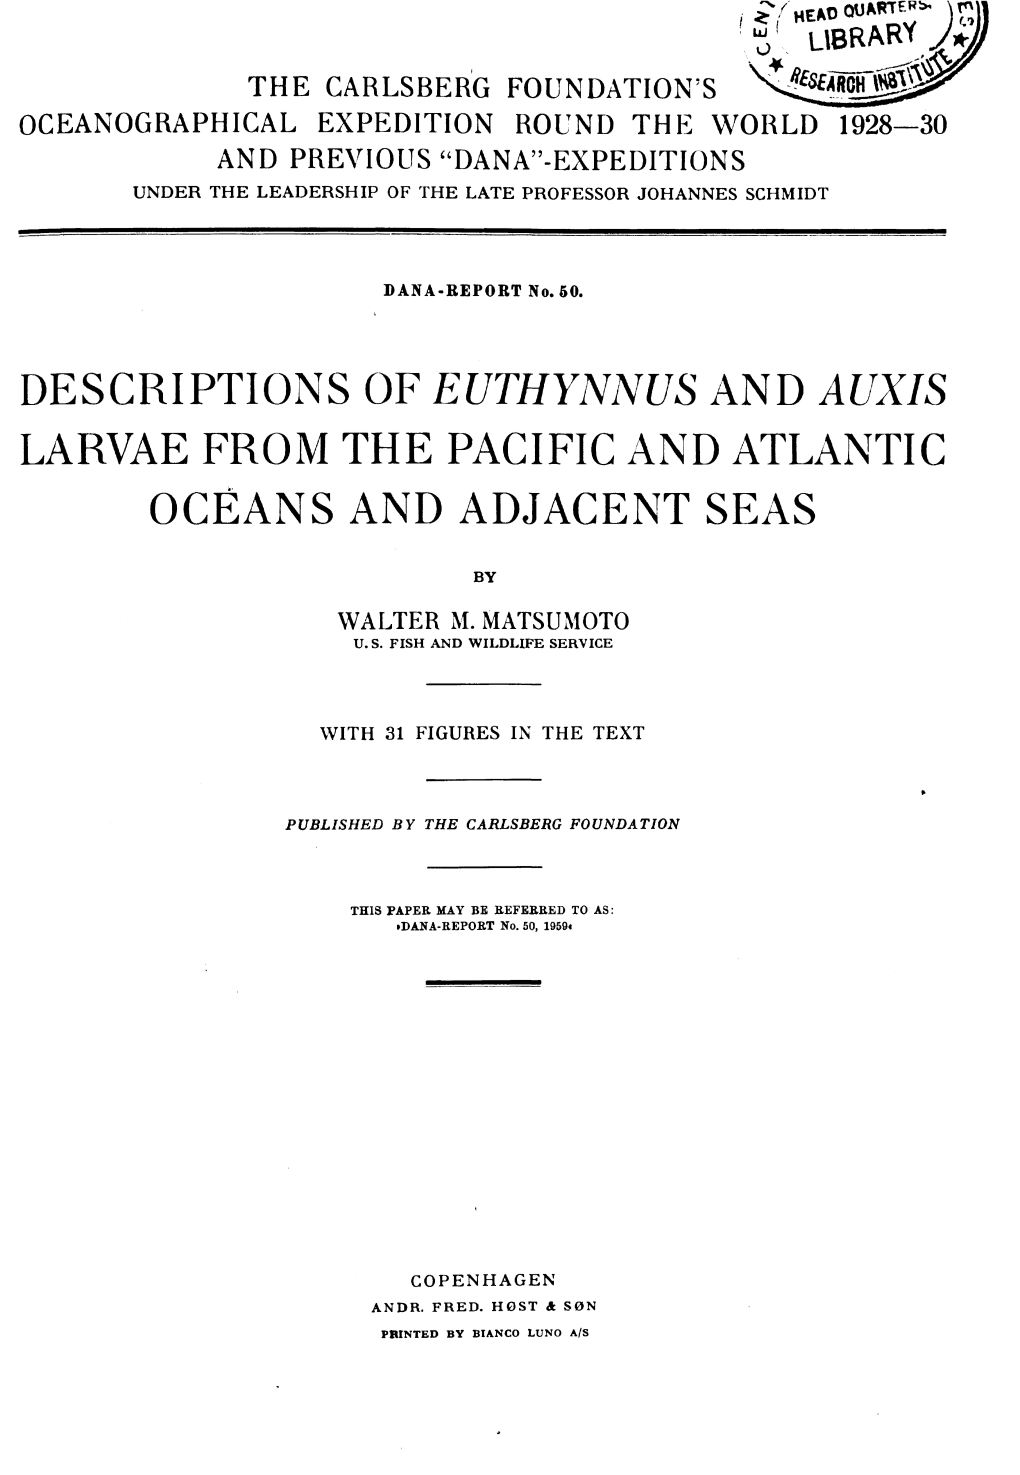 Descriptions of Euthynnus and Auxis Larvae from the Pacific and Atlantic Oceans and Adjacent Seas